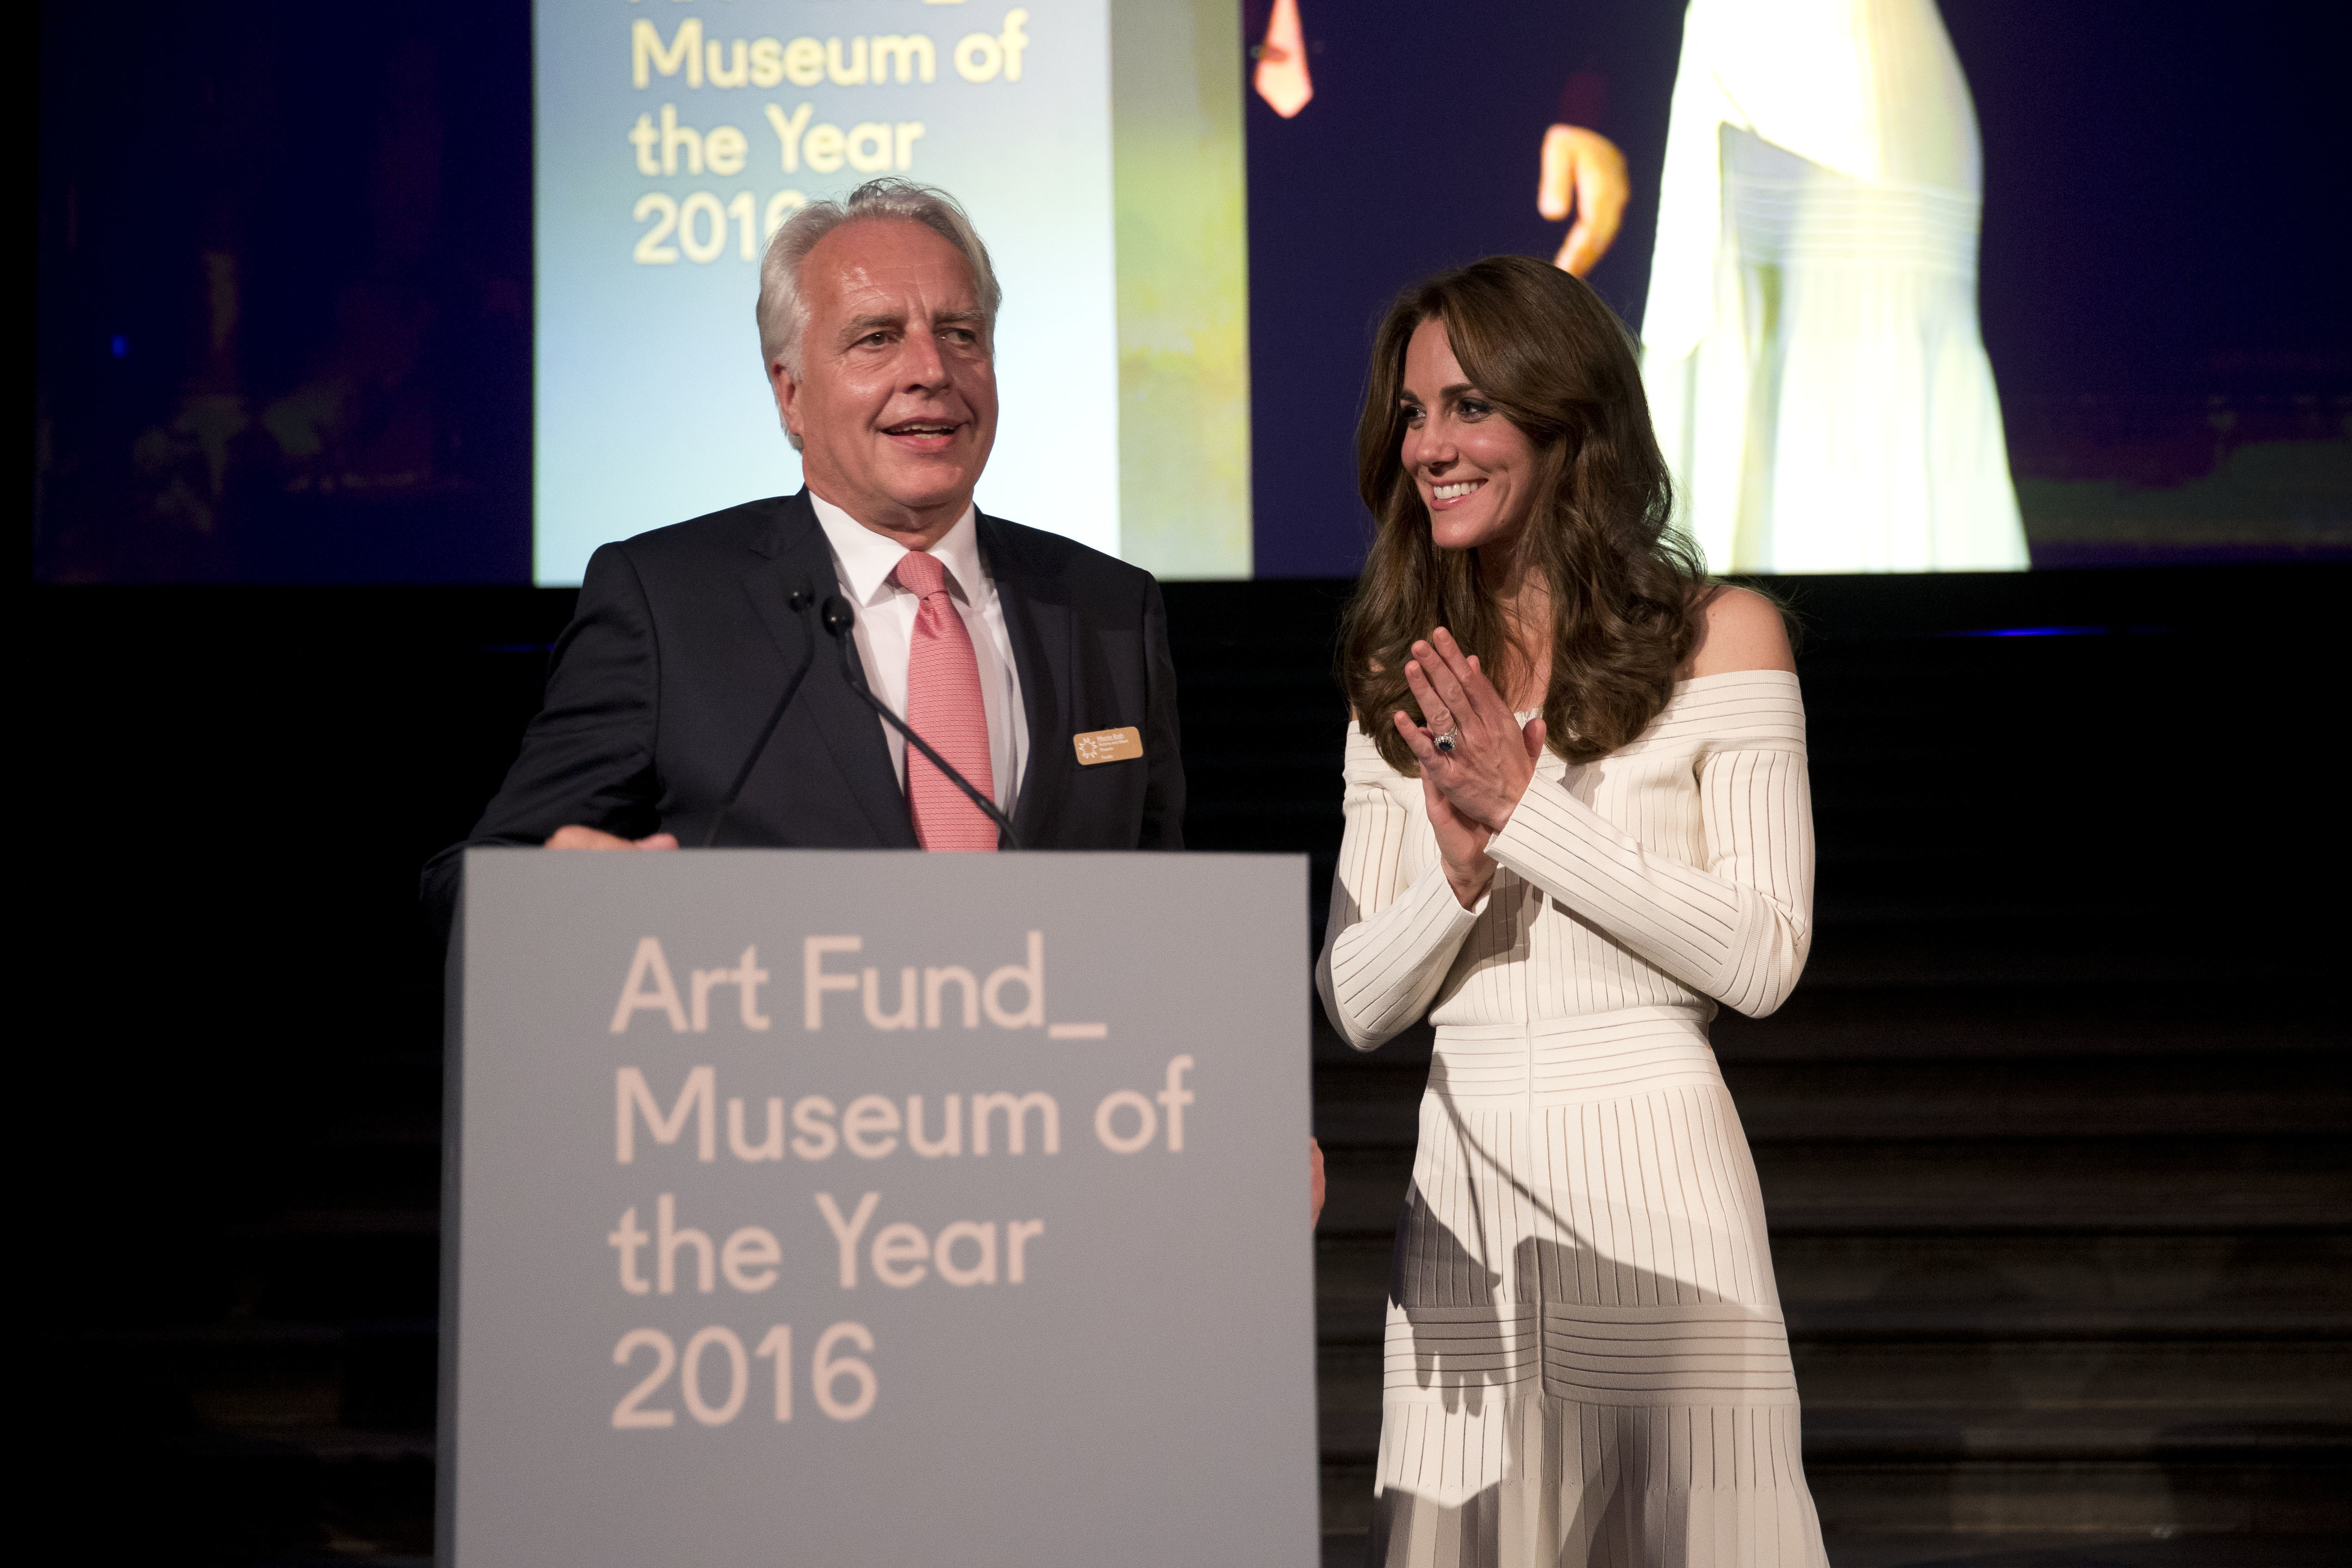 LONDON, ENGLAND - JULY 07: Catherine, Duchess of Cambridge applauds Germany's Martin Roth the Director of the Victoria and Albert Museum as he speaks on stage in his capacity as the representative of the winner of the Art Fund Museum of the Year 2016 prize at the Natural History Museum on July 6, 2016 in London, United Kingdom. The Art Fund Museum of the Year prize is awarded annually to one outstanding museum which has shown exceptional imagination, innovation and achievement in the preceding year.